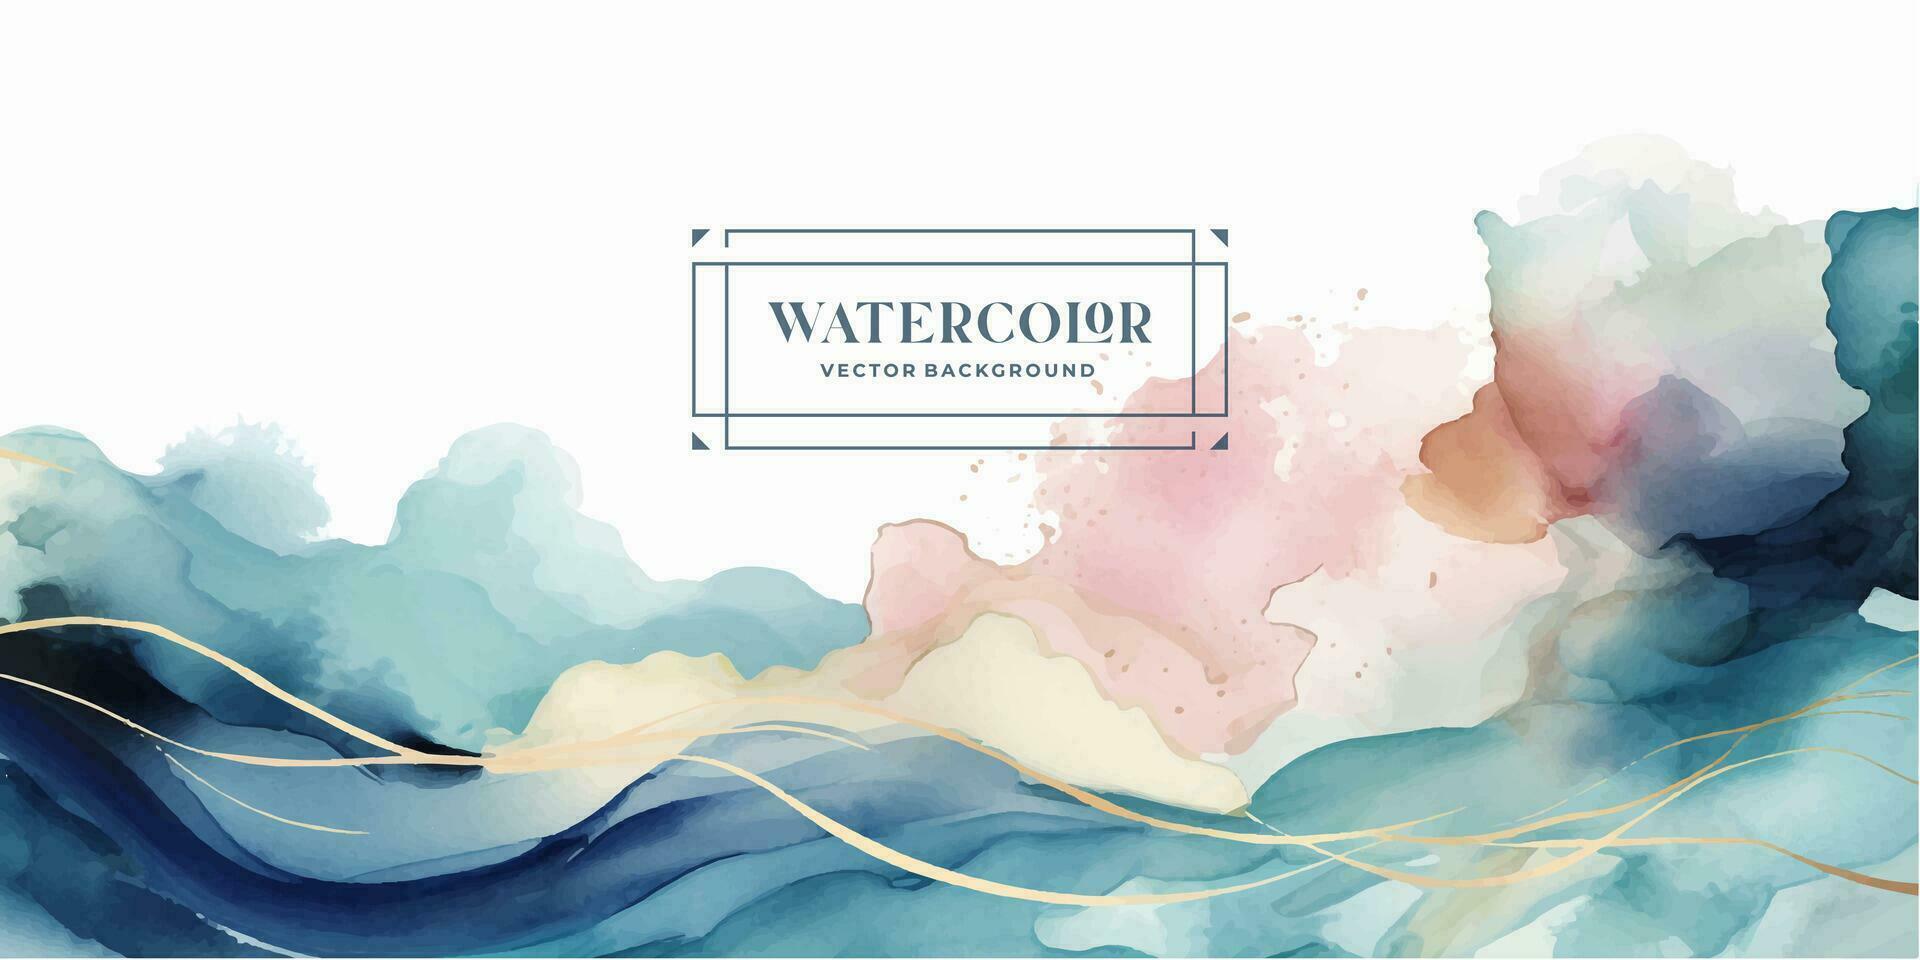 Watercolor art background vector. Wallpaper design with paint brush and gold line art. Earth tone blue, pink, ivory, beige watercolor Illustration for prints, wall art, cover and invitation cards. vector